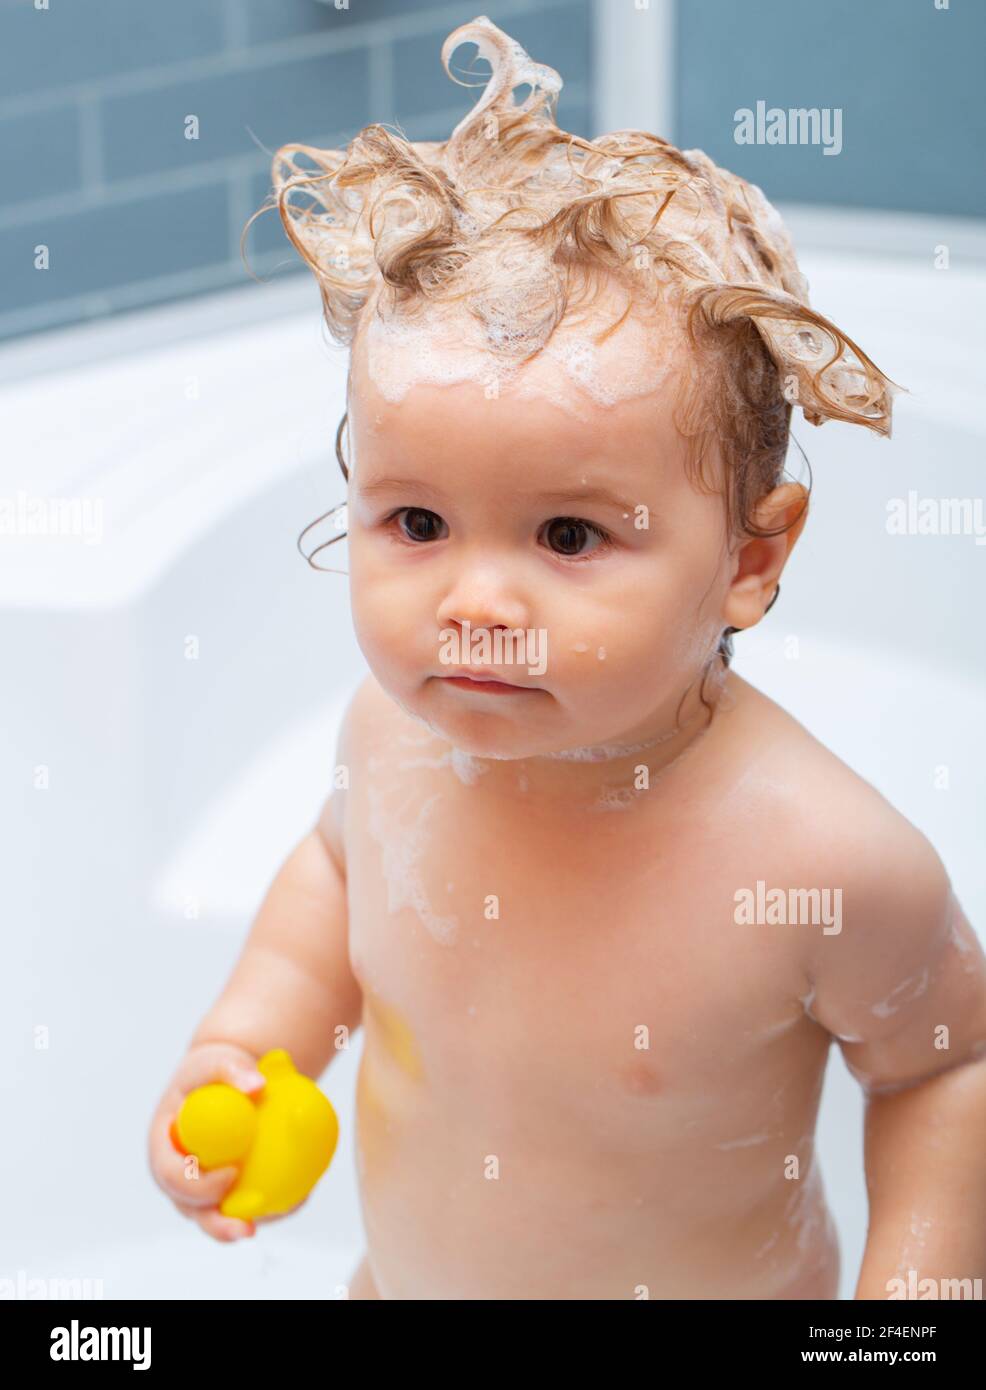 Funny blond kid boy having fun with water by taking bath in bathtub.  Washing adorable baby in bathroom. Kid with soap suds on hair taking bath.  Kids Stock Photo - Alamy